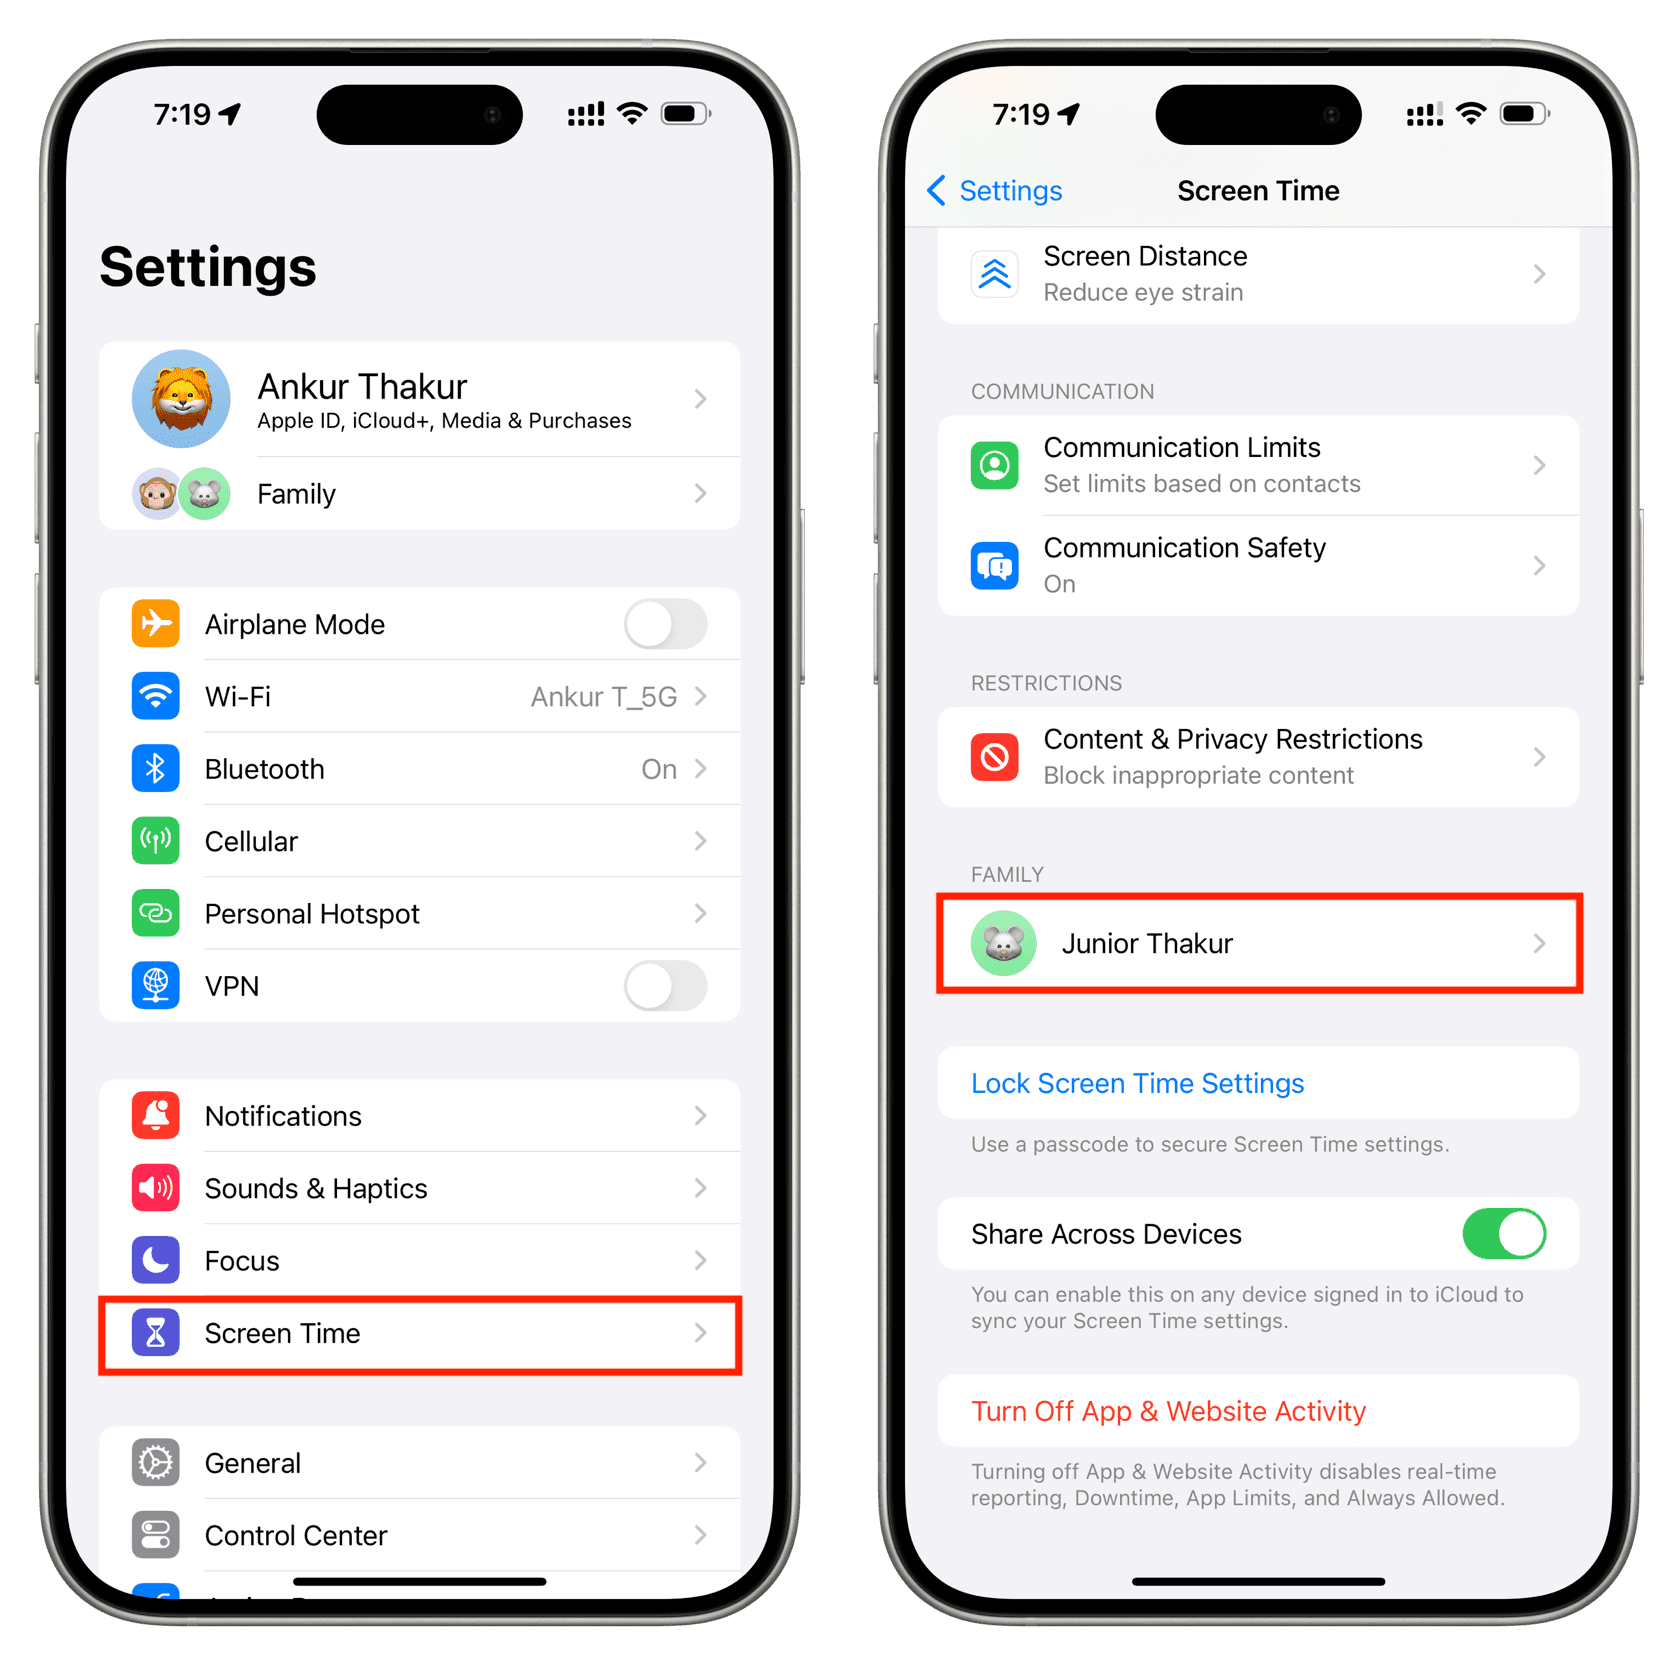 Tap your child name in iPhone Screen Time settings